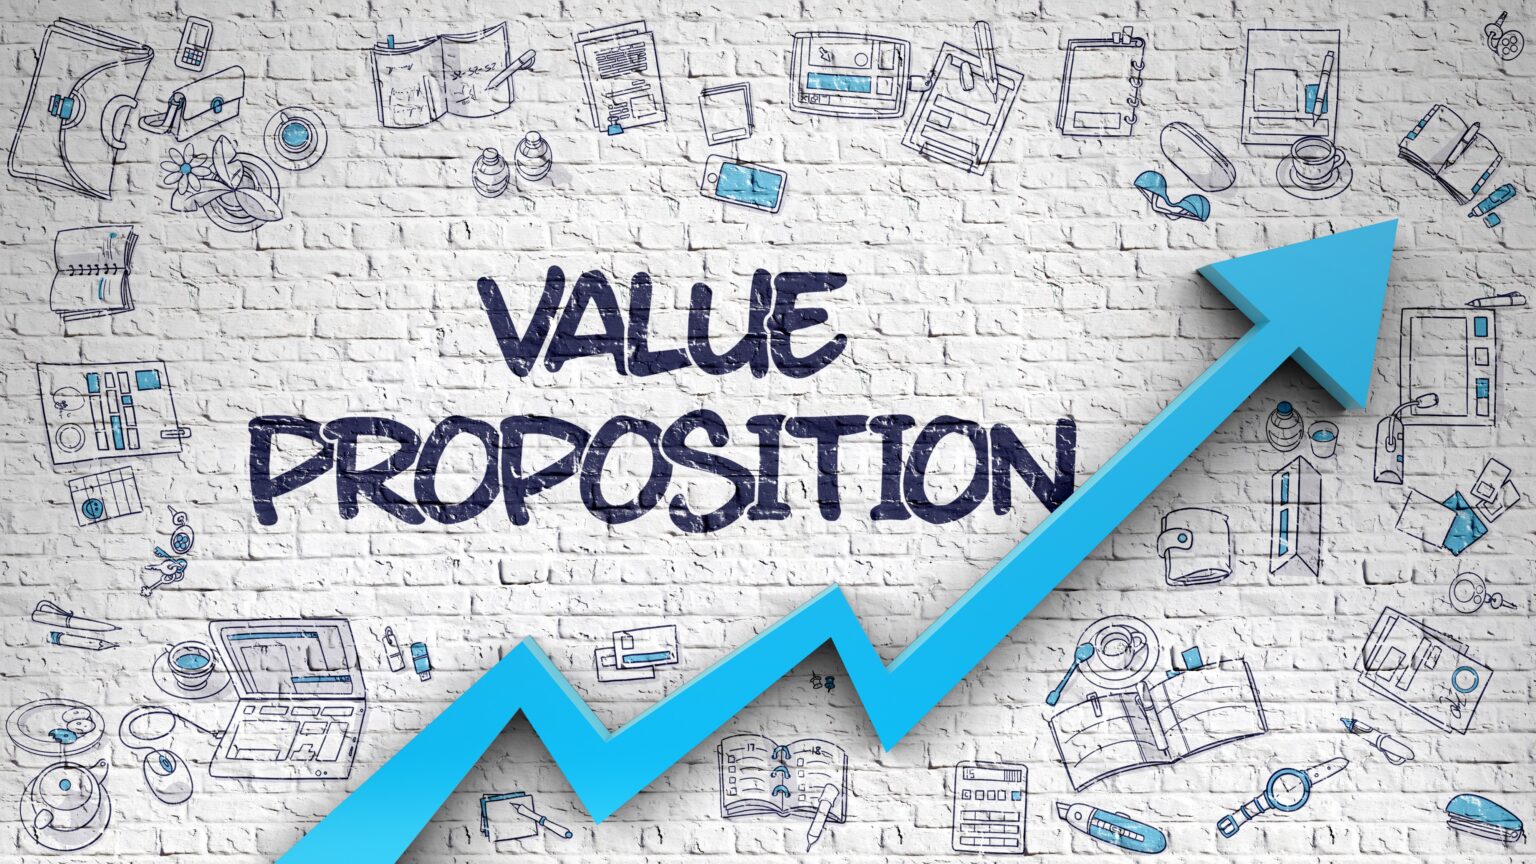 Look at any well-written Business Plan and you’ll see a section called "Value Proposition". How can an entrepreneur create a compelling value proposition?